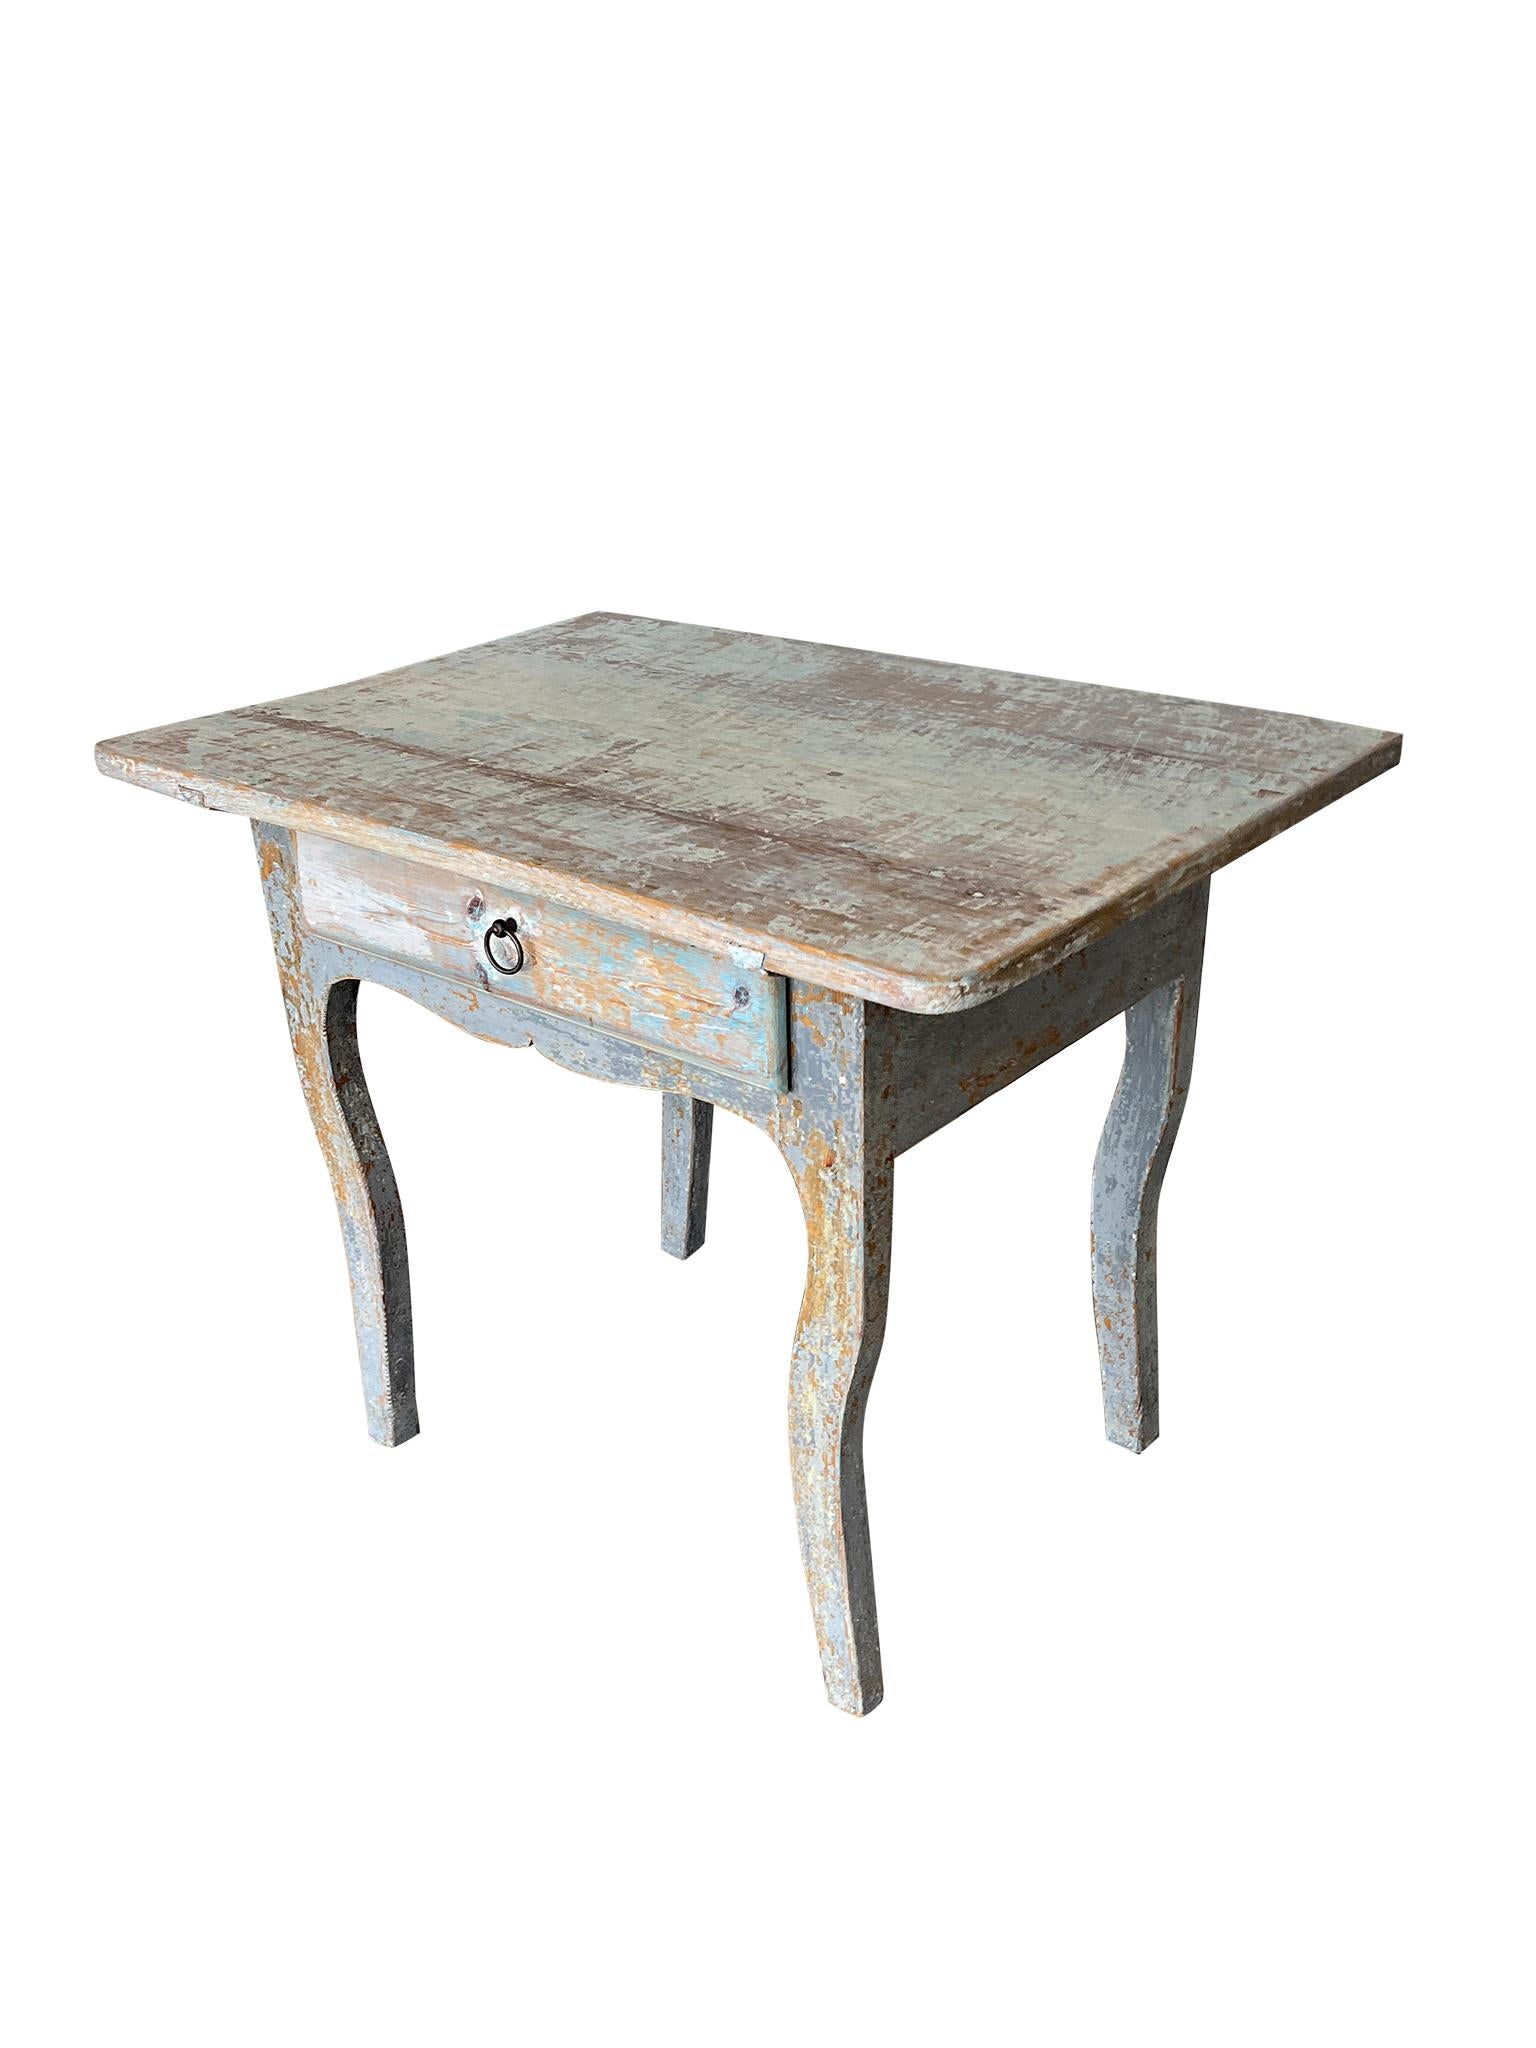 Late 18th Century Gustavian Era Swedish Wood Side Table. Crafted in solid wood that has patinated nicely into a blue-gray over time. Side table designed with cabriole legs, storage drawer, and aproned table top. 

Dimensions: 
36 in. Width
25.4 in.